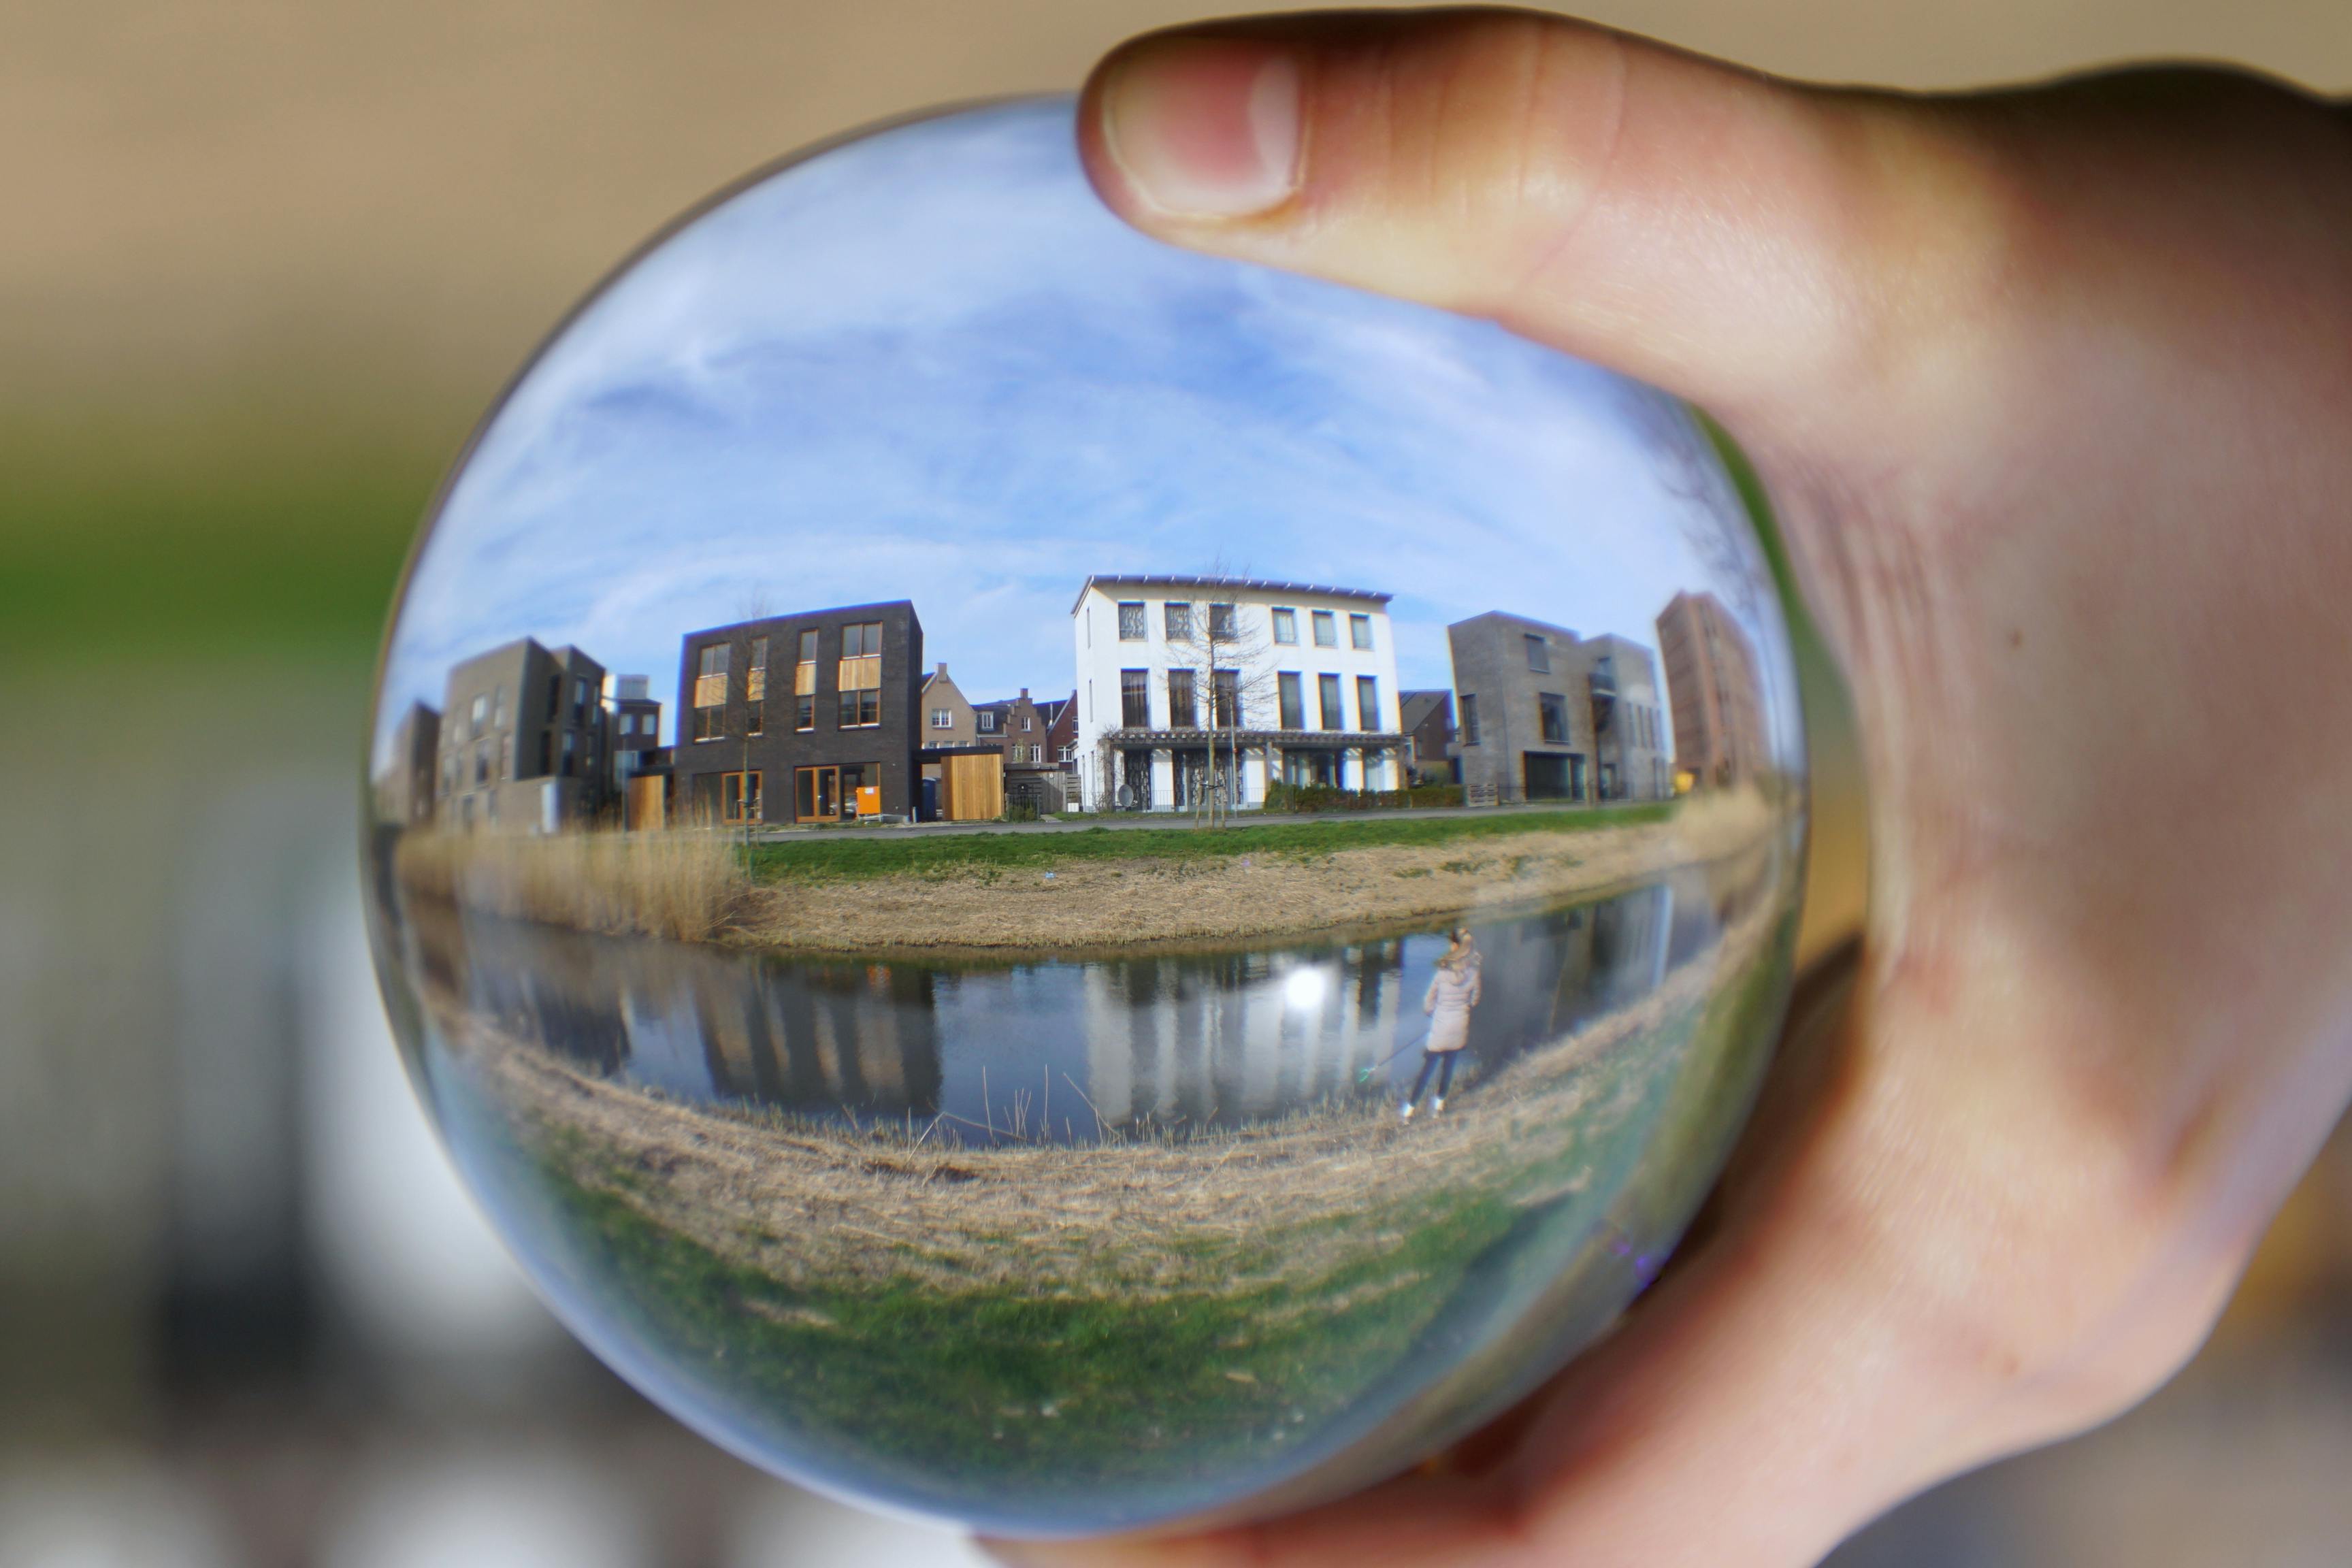 The image shows a hand holding a crystal ball.  Within the sphere are a row of three-story apartment buildings with one colored grey, one black, one white, and another grey. A blue sky with thin white clouds is overhead and in the foreground is a green and brown grass strip with a small canal running through the center of the area. The image of the crystal and housing conveys 7 predictions for the 2024 rental market.